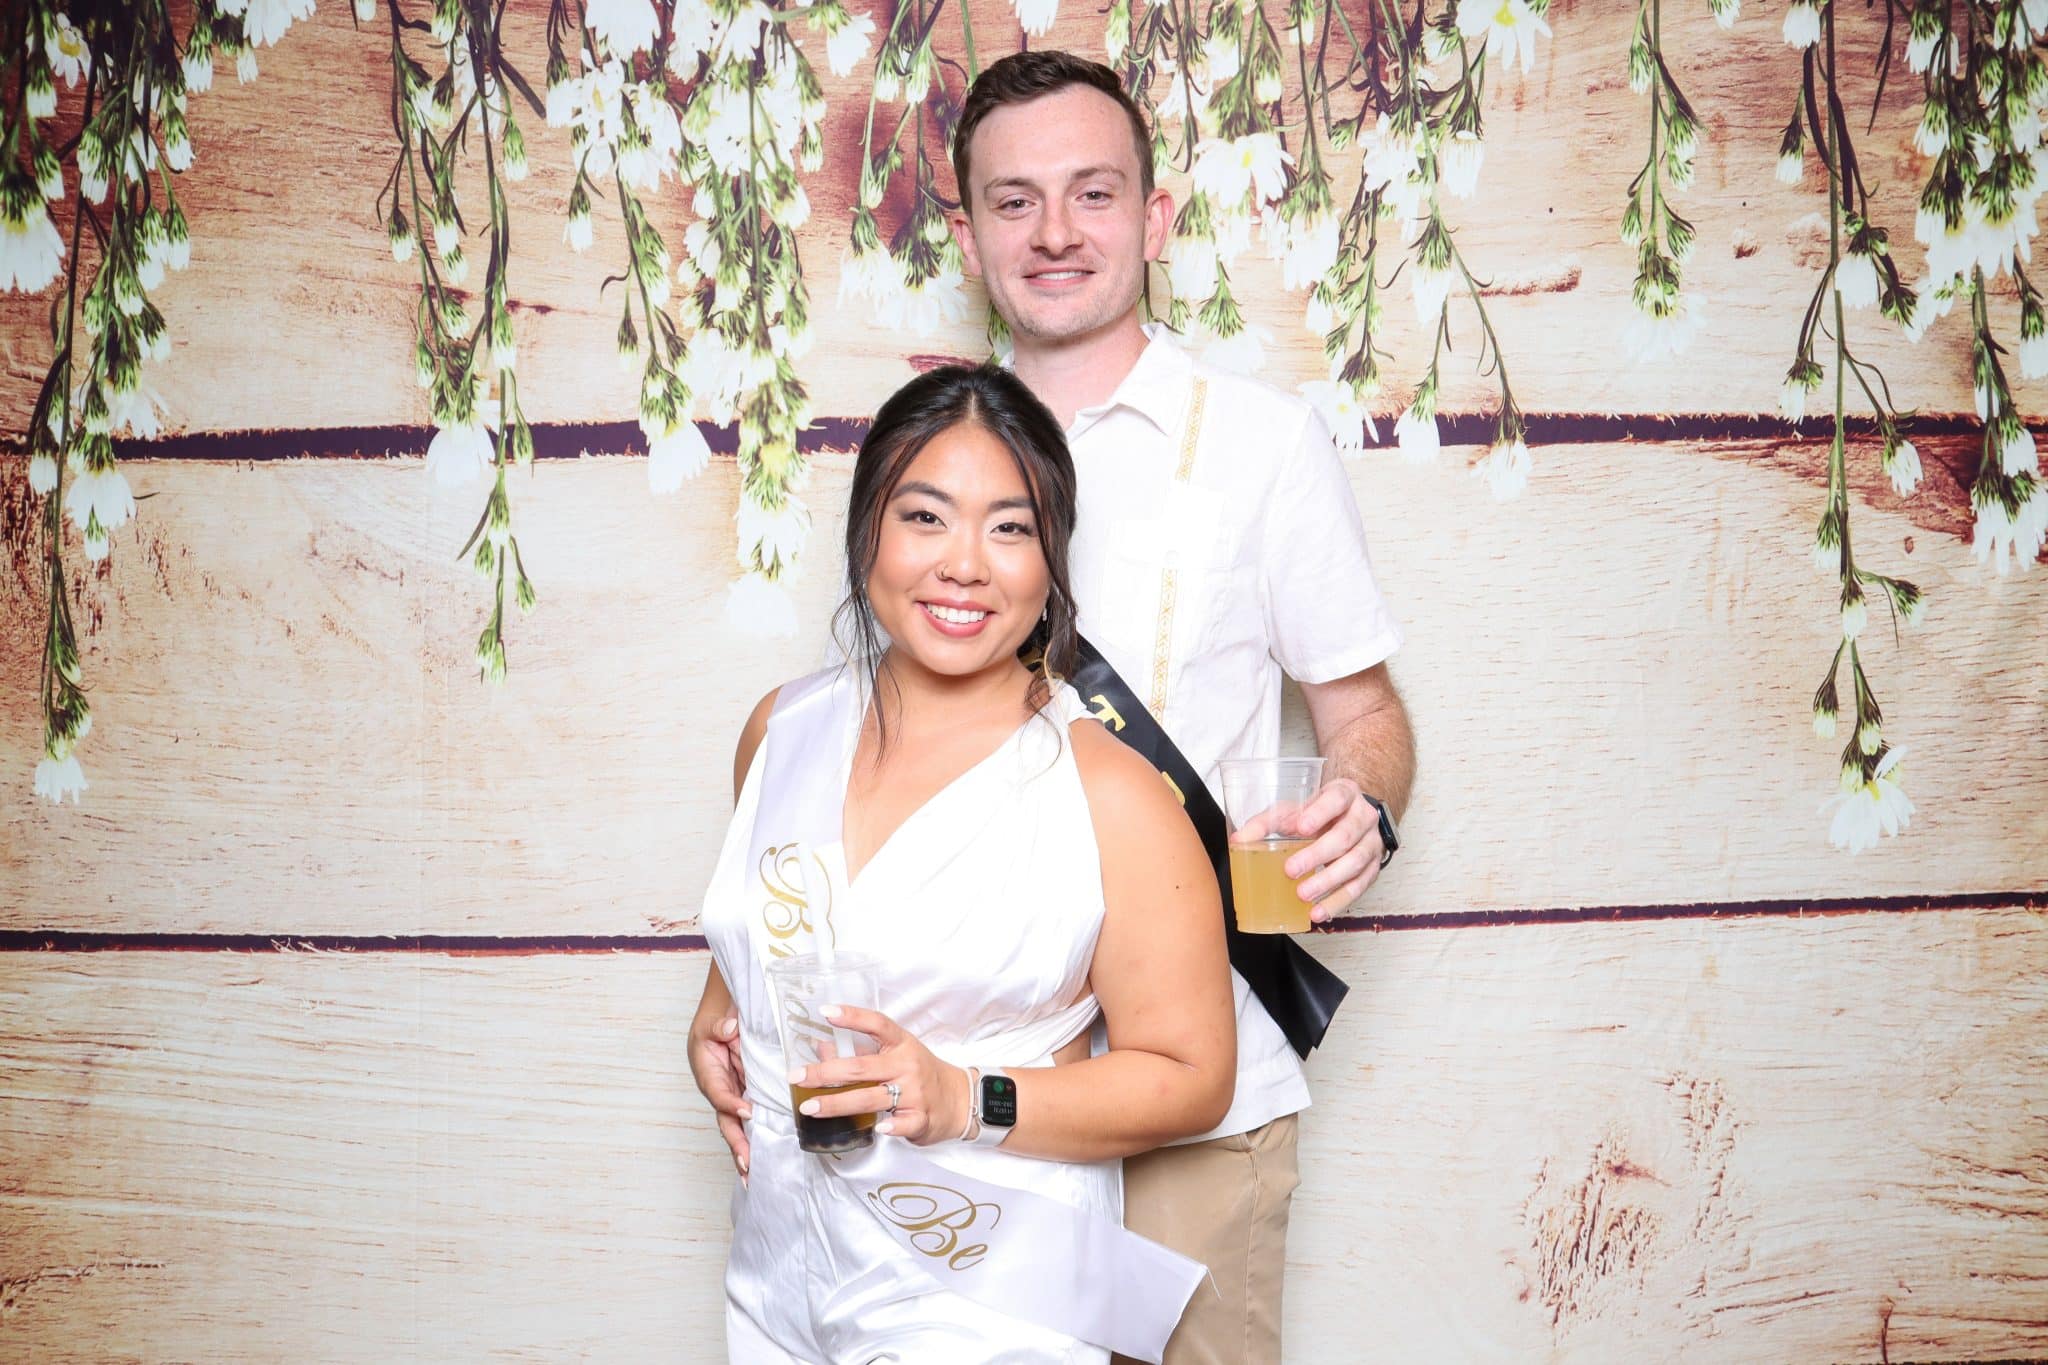 couple both wearing white stand together holding drinks in front of backdrop